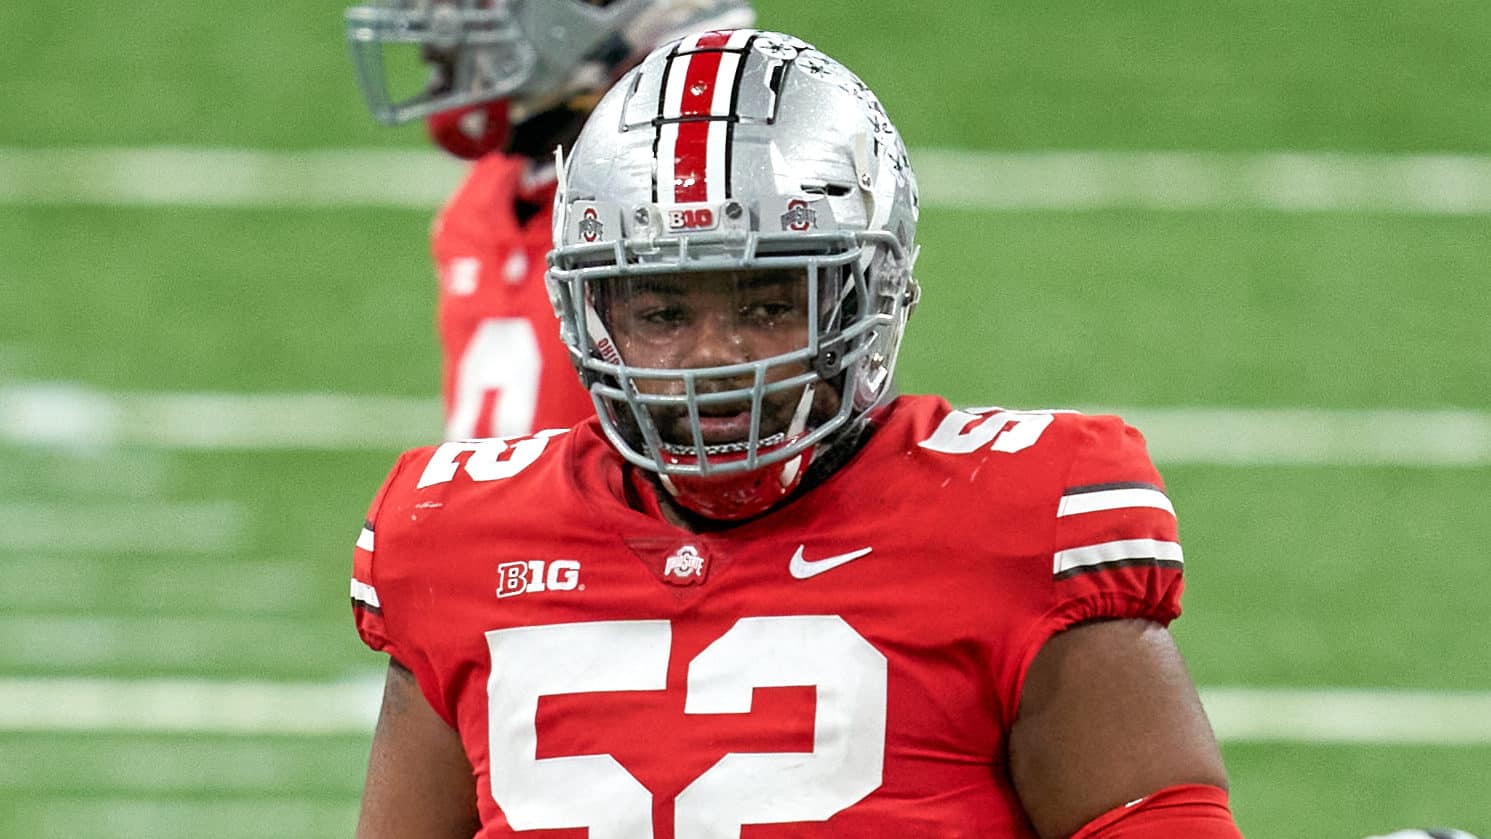 INDIANAPOLIS, IN - DECEMBER 19: Ohio State Buckeyes offensive lineman Wyatt Davis (52) looks on in action during the Big Ten Championship game between the Ohio State Buckeyes and the Northwestern Wildcats on December 19, 2020 at Lucas Oil stadium, in Indianapolis, IN.